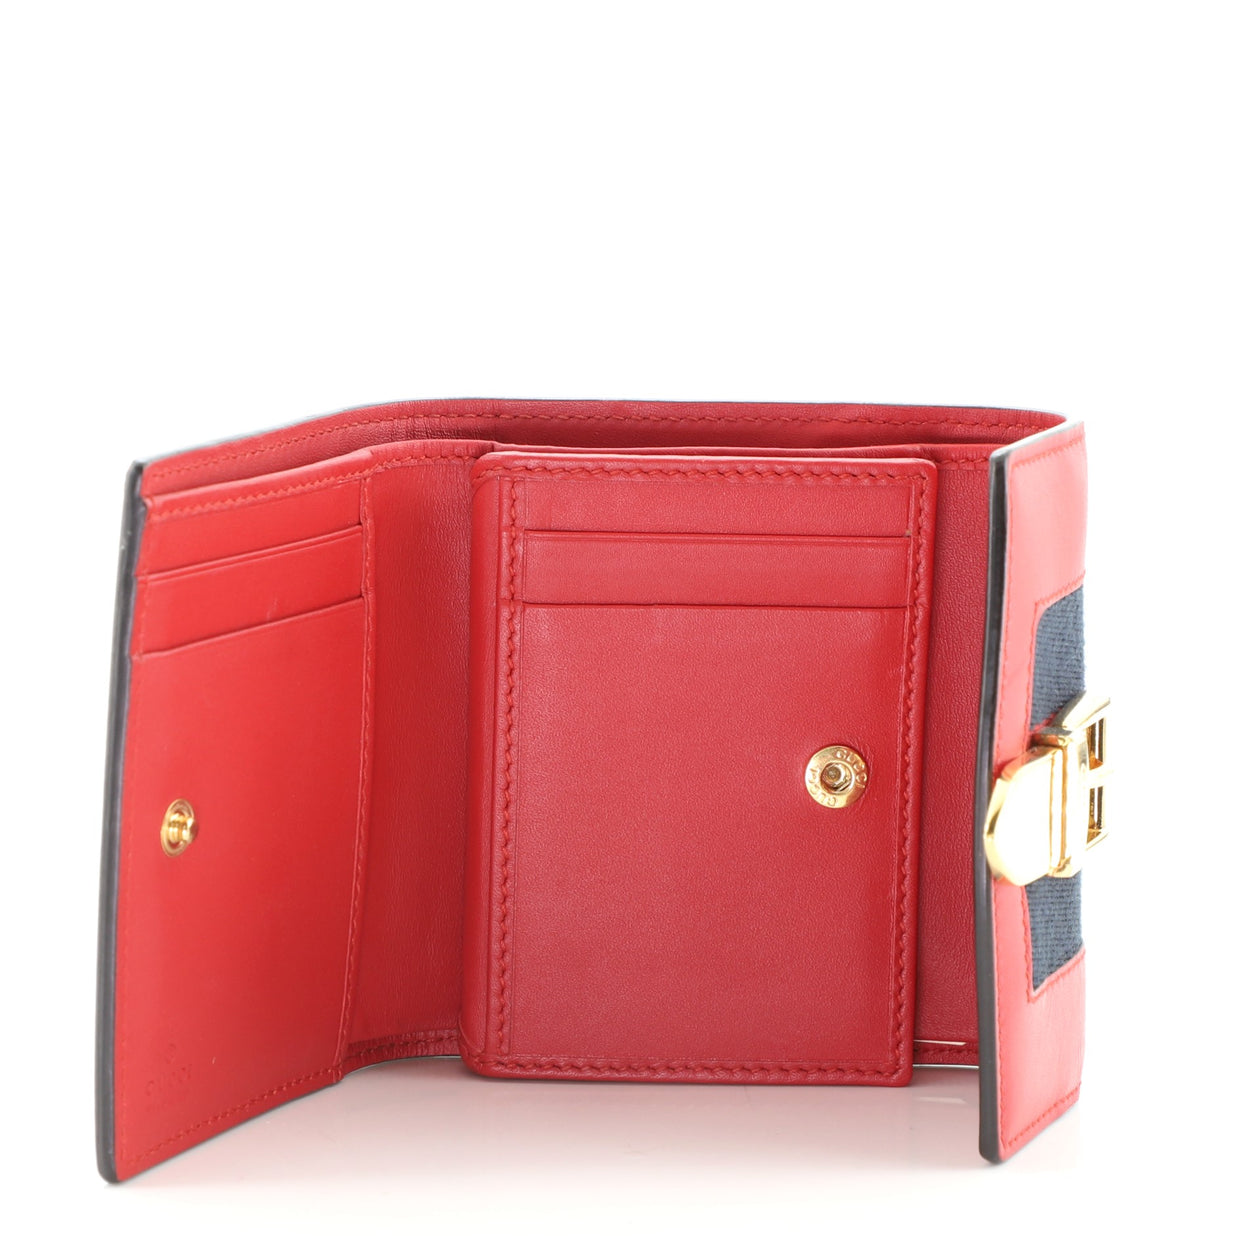 Gucci Sylvie Compact Wallet Leather Red 8408311